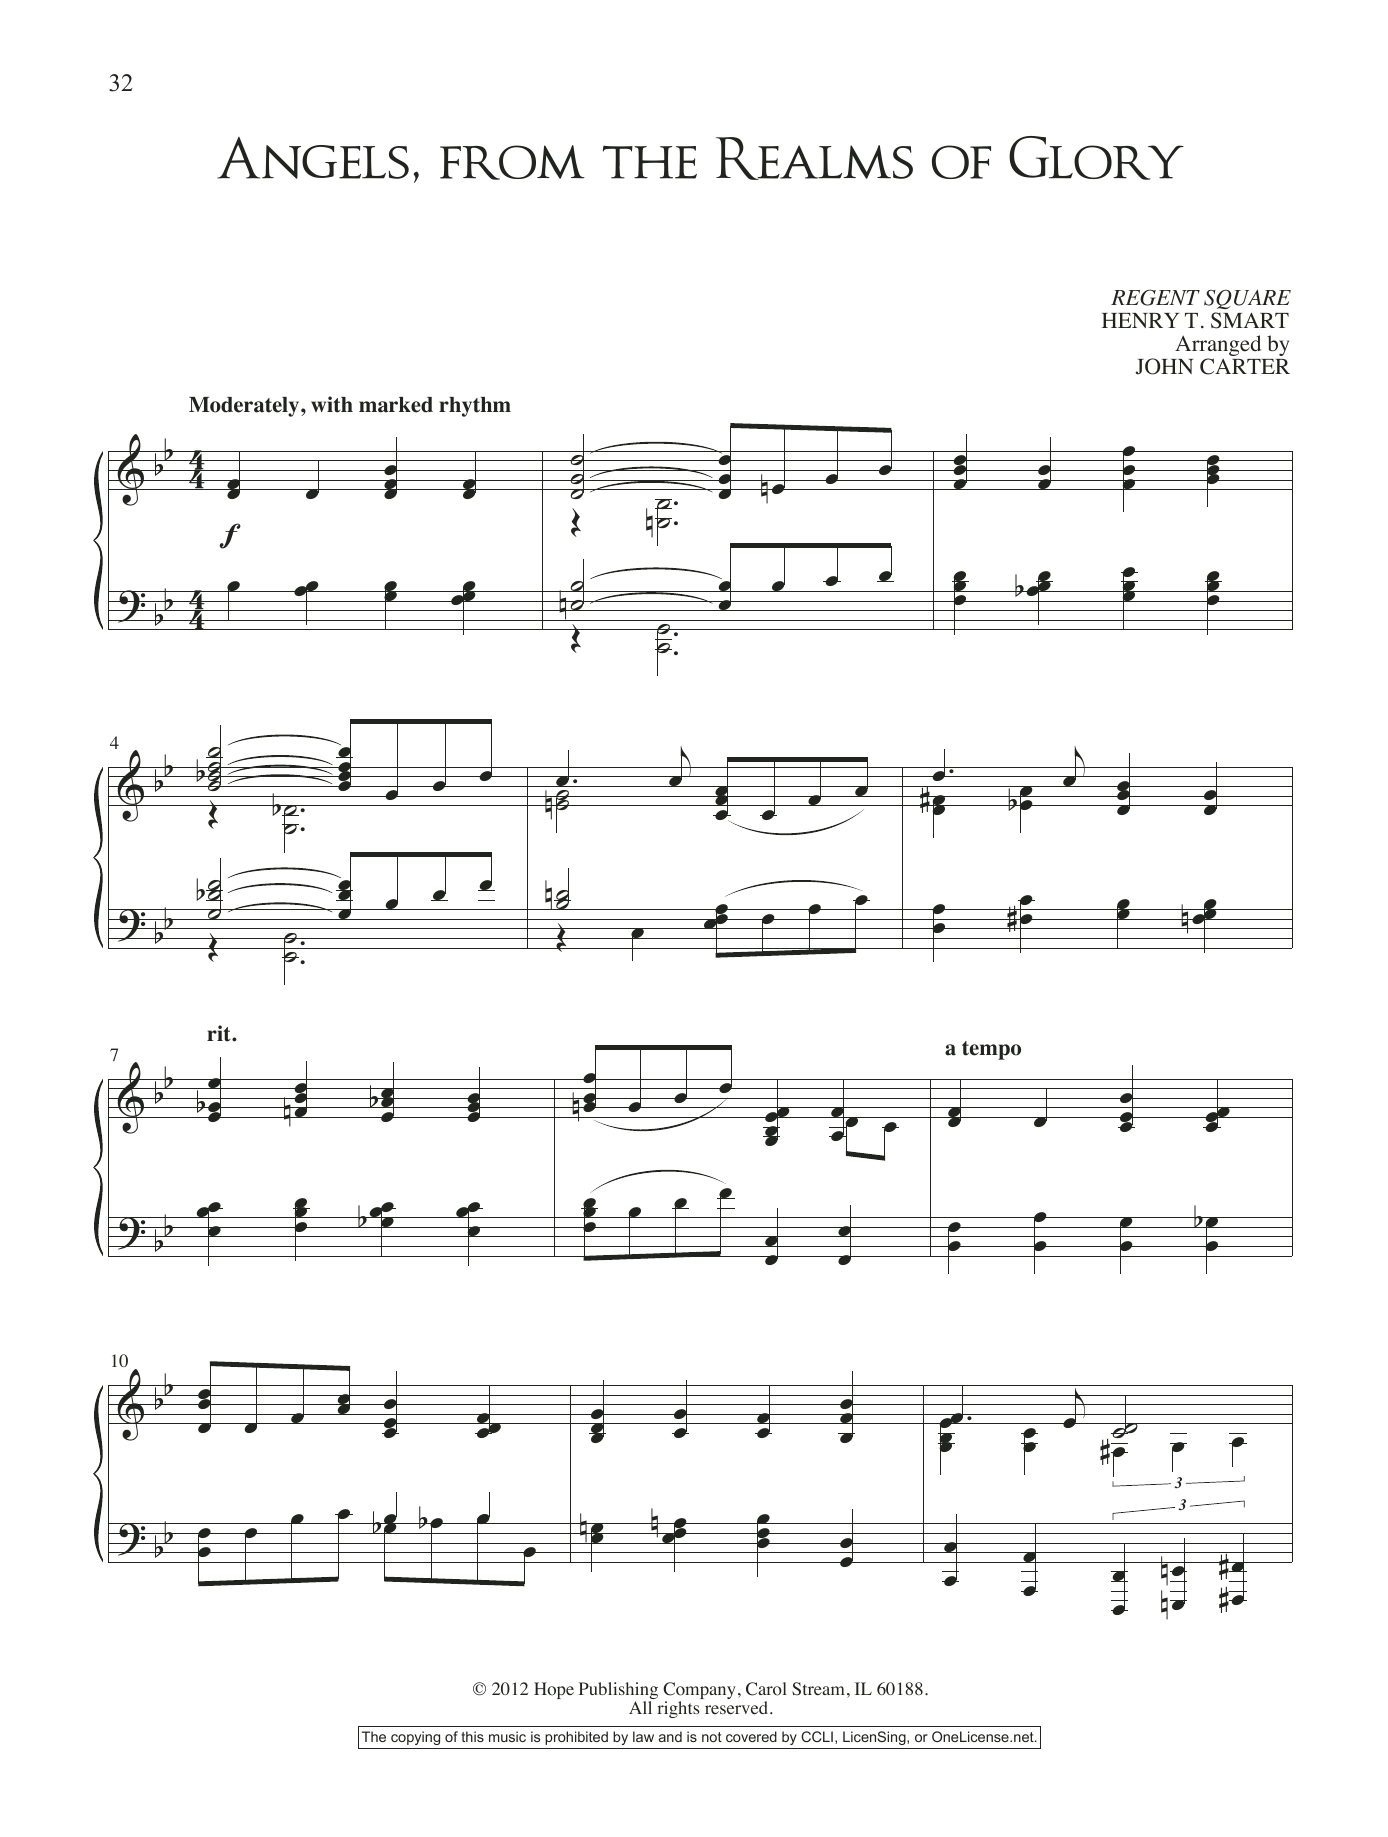 Download John Carter Angels, From The Realms Of Glory Sheet Music